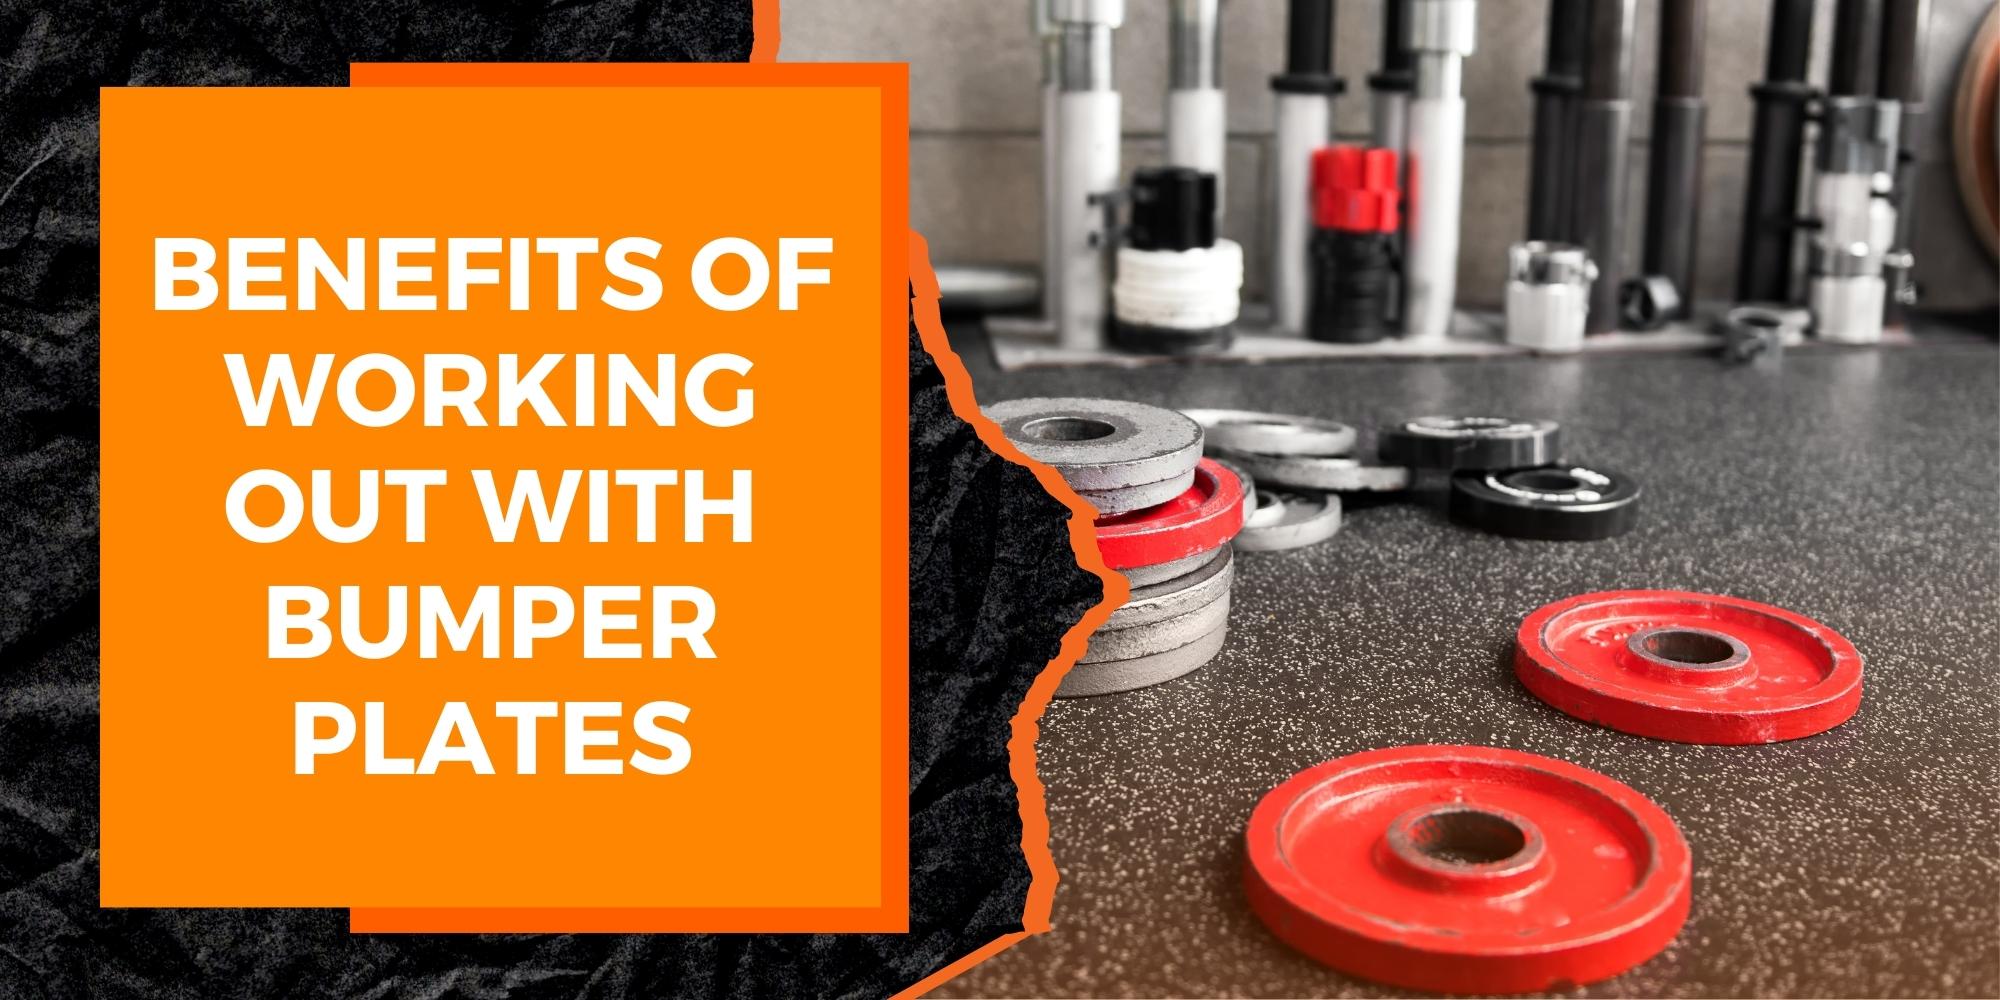 The Benefits of Working Out With Bumper Plates